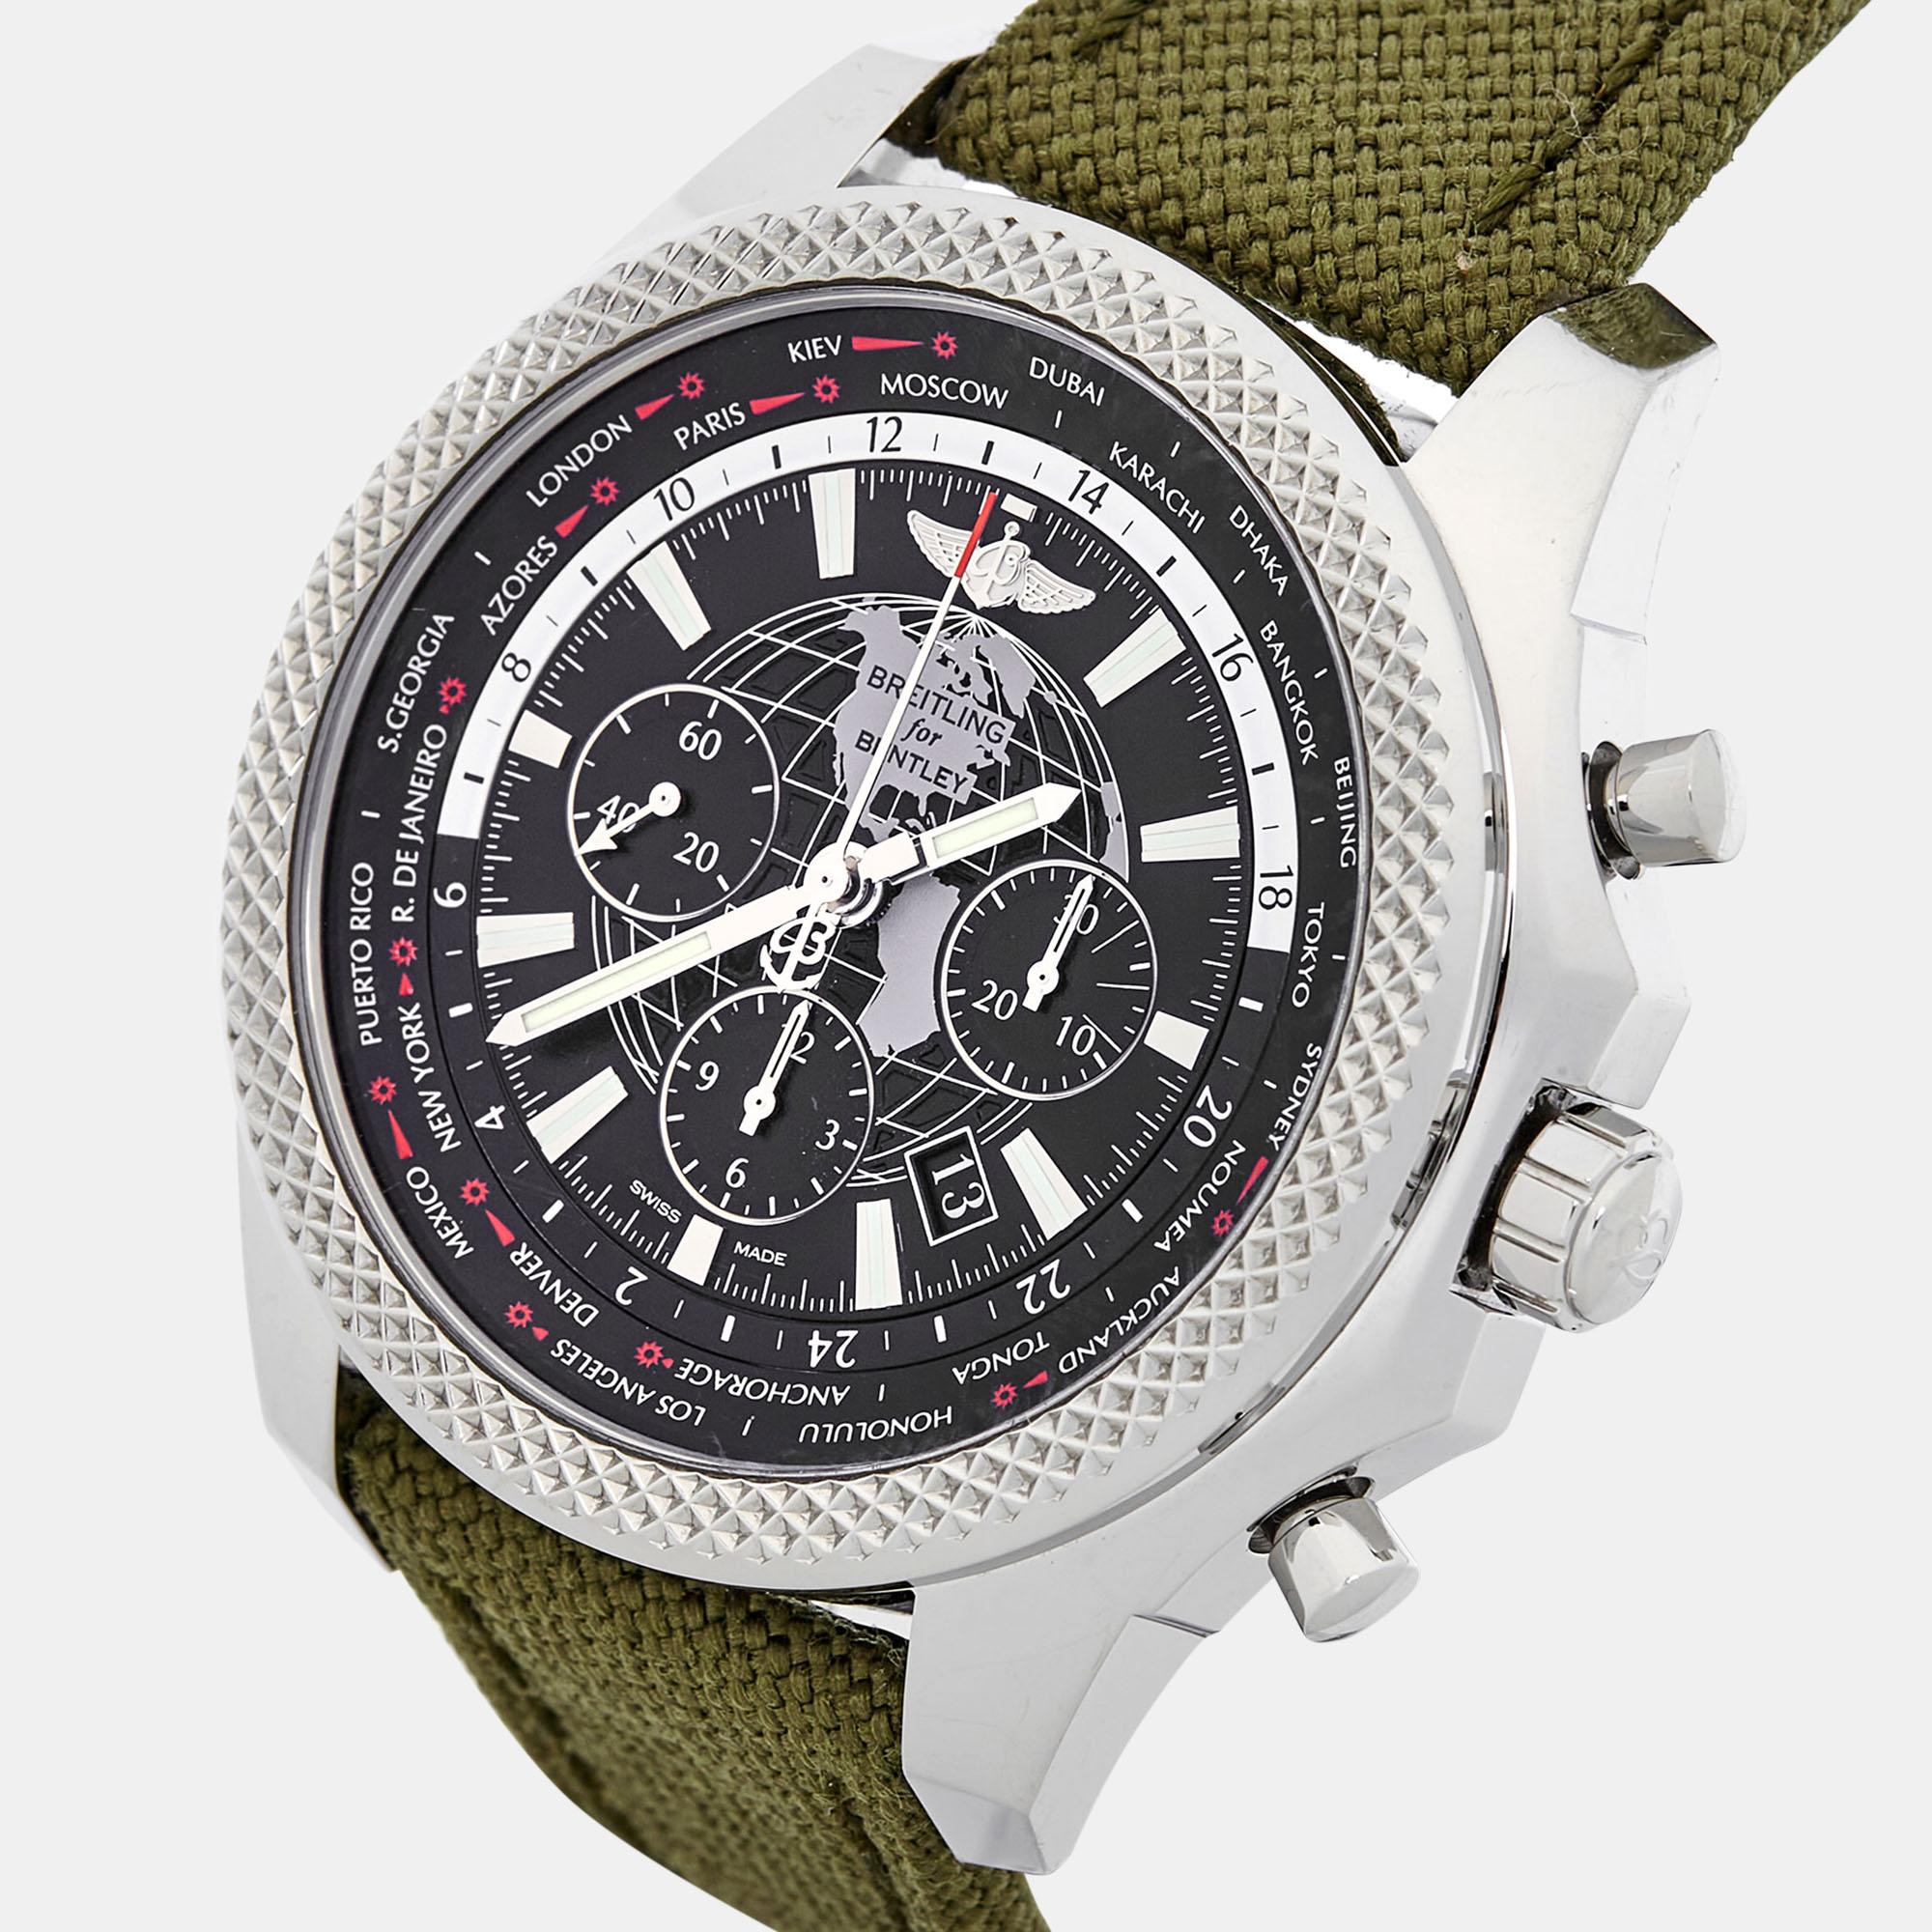 Special edition watches are great finds as they are perfect to complement one's unique style. Exclusivity makes them exceptional and noteworthy. This Breitling for Bentley B05 Unitime GMT watch pairs a stainless steel case with fabric straps, and